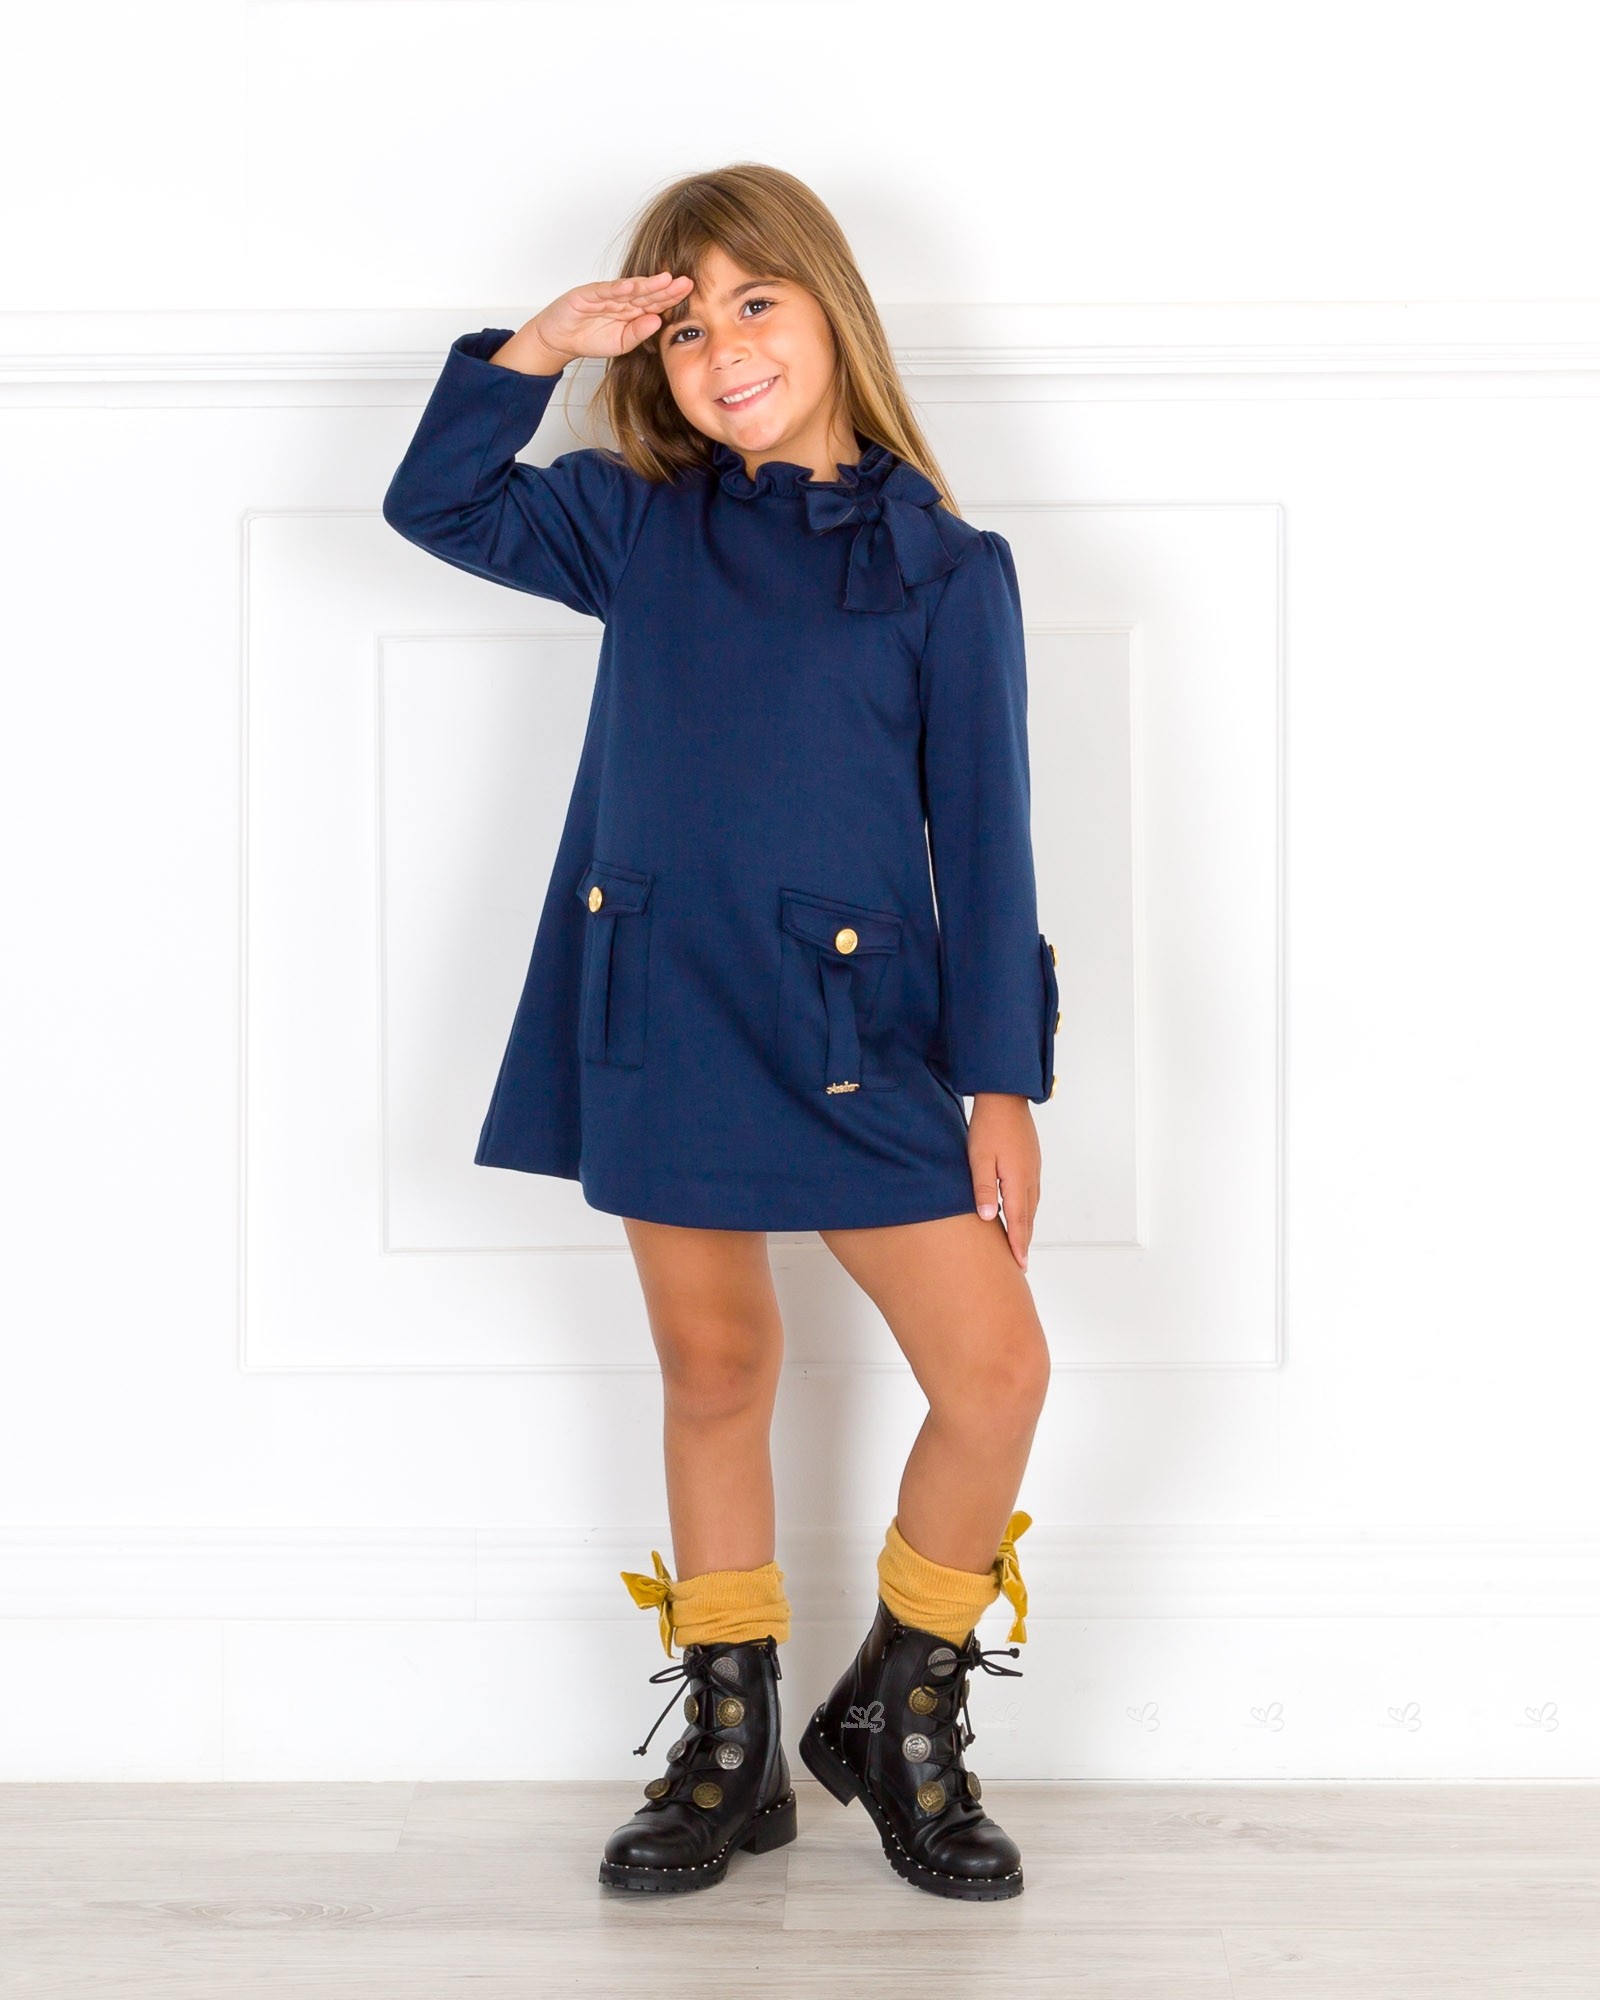 Mustard And Navy Blue Outfit Shop, 60 ...